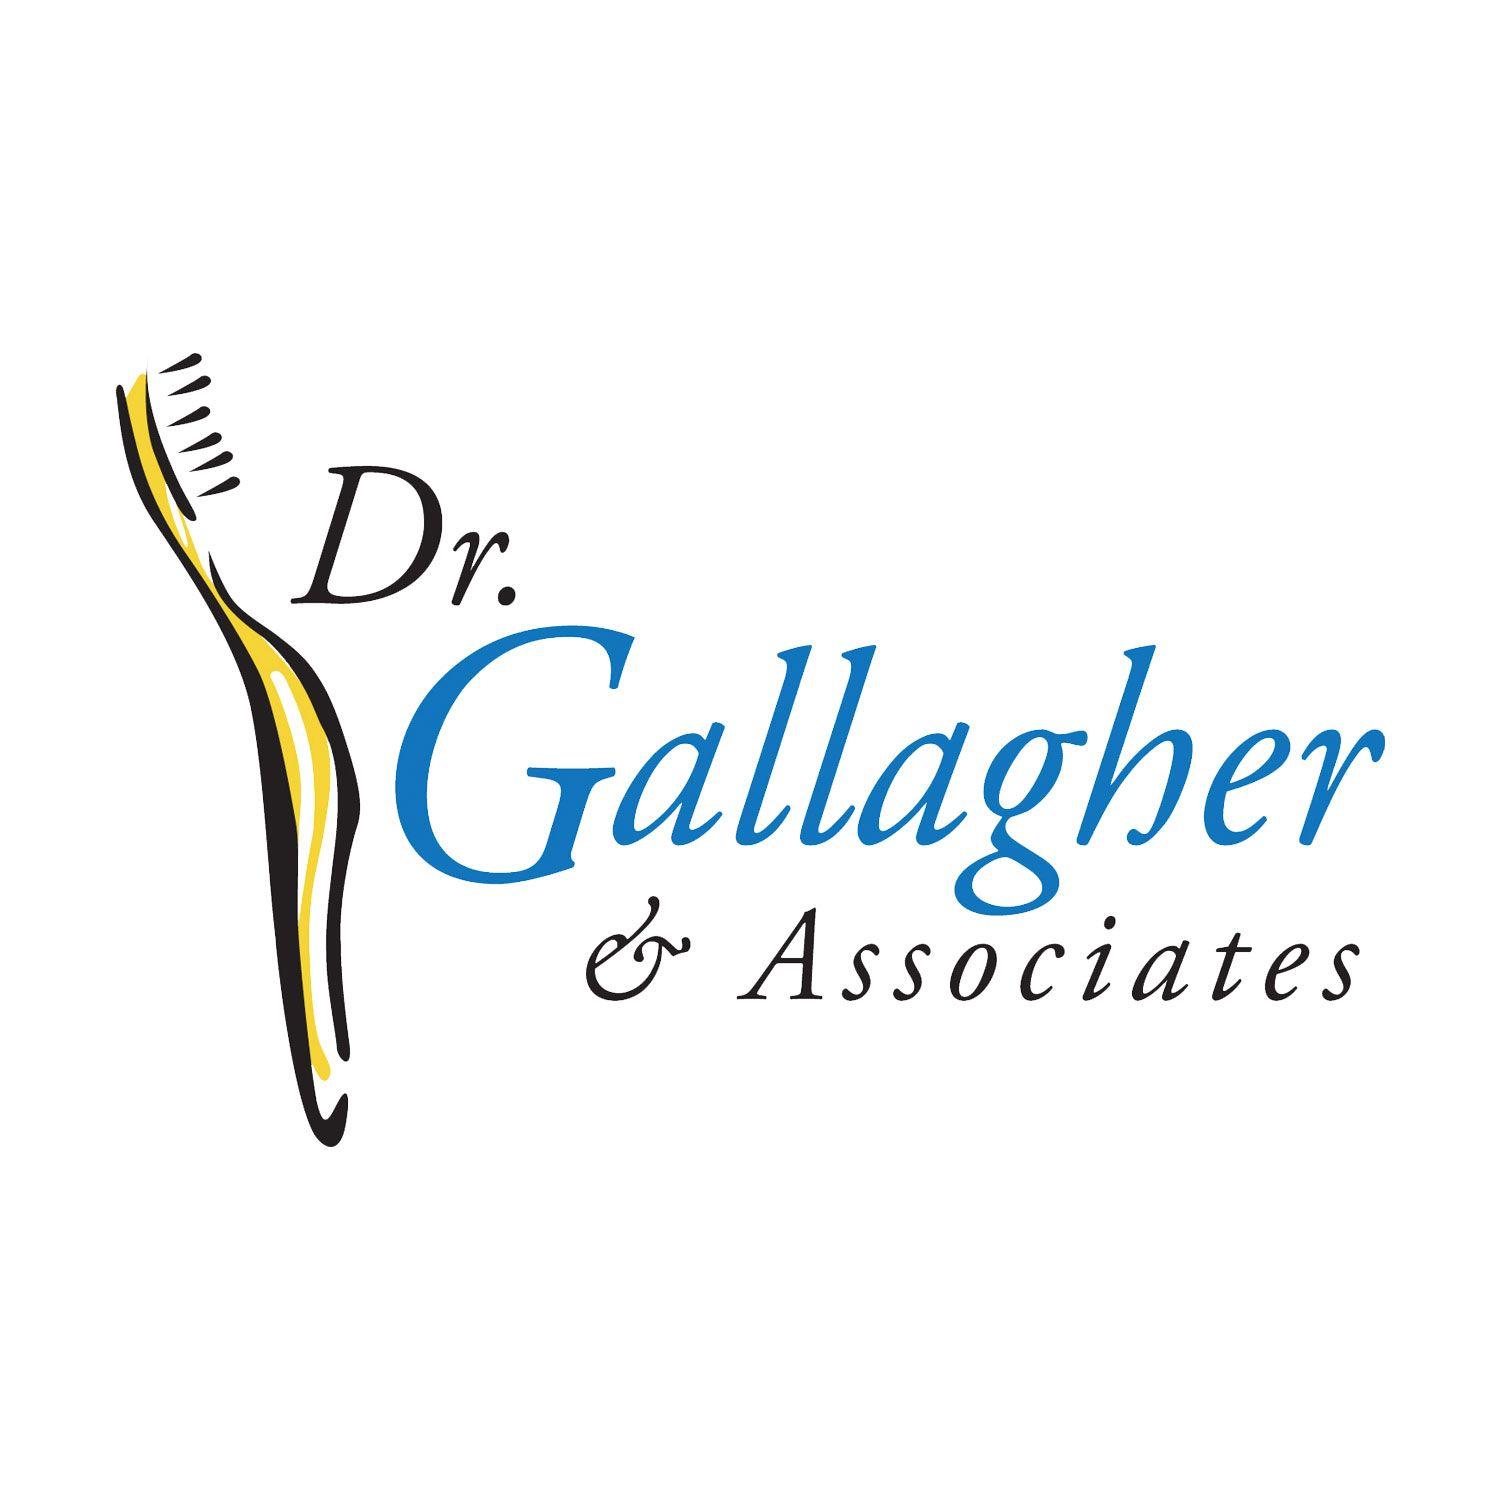 Gallagher and Associates Logo - Dr. Gallagher & Associates - Welcome Wagon